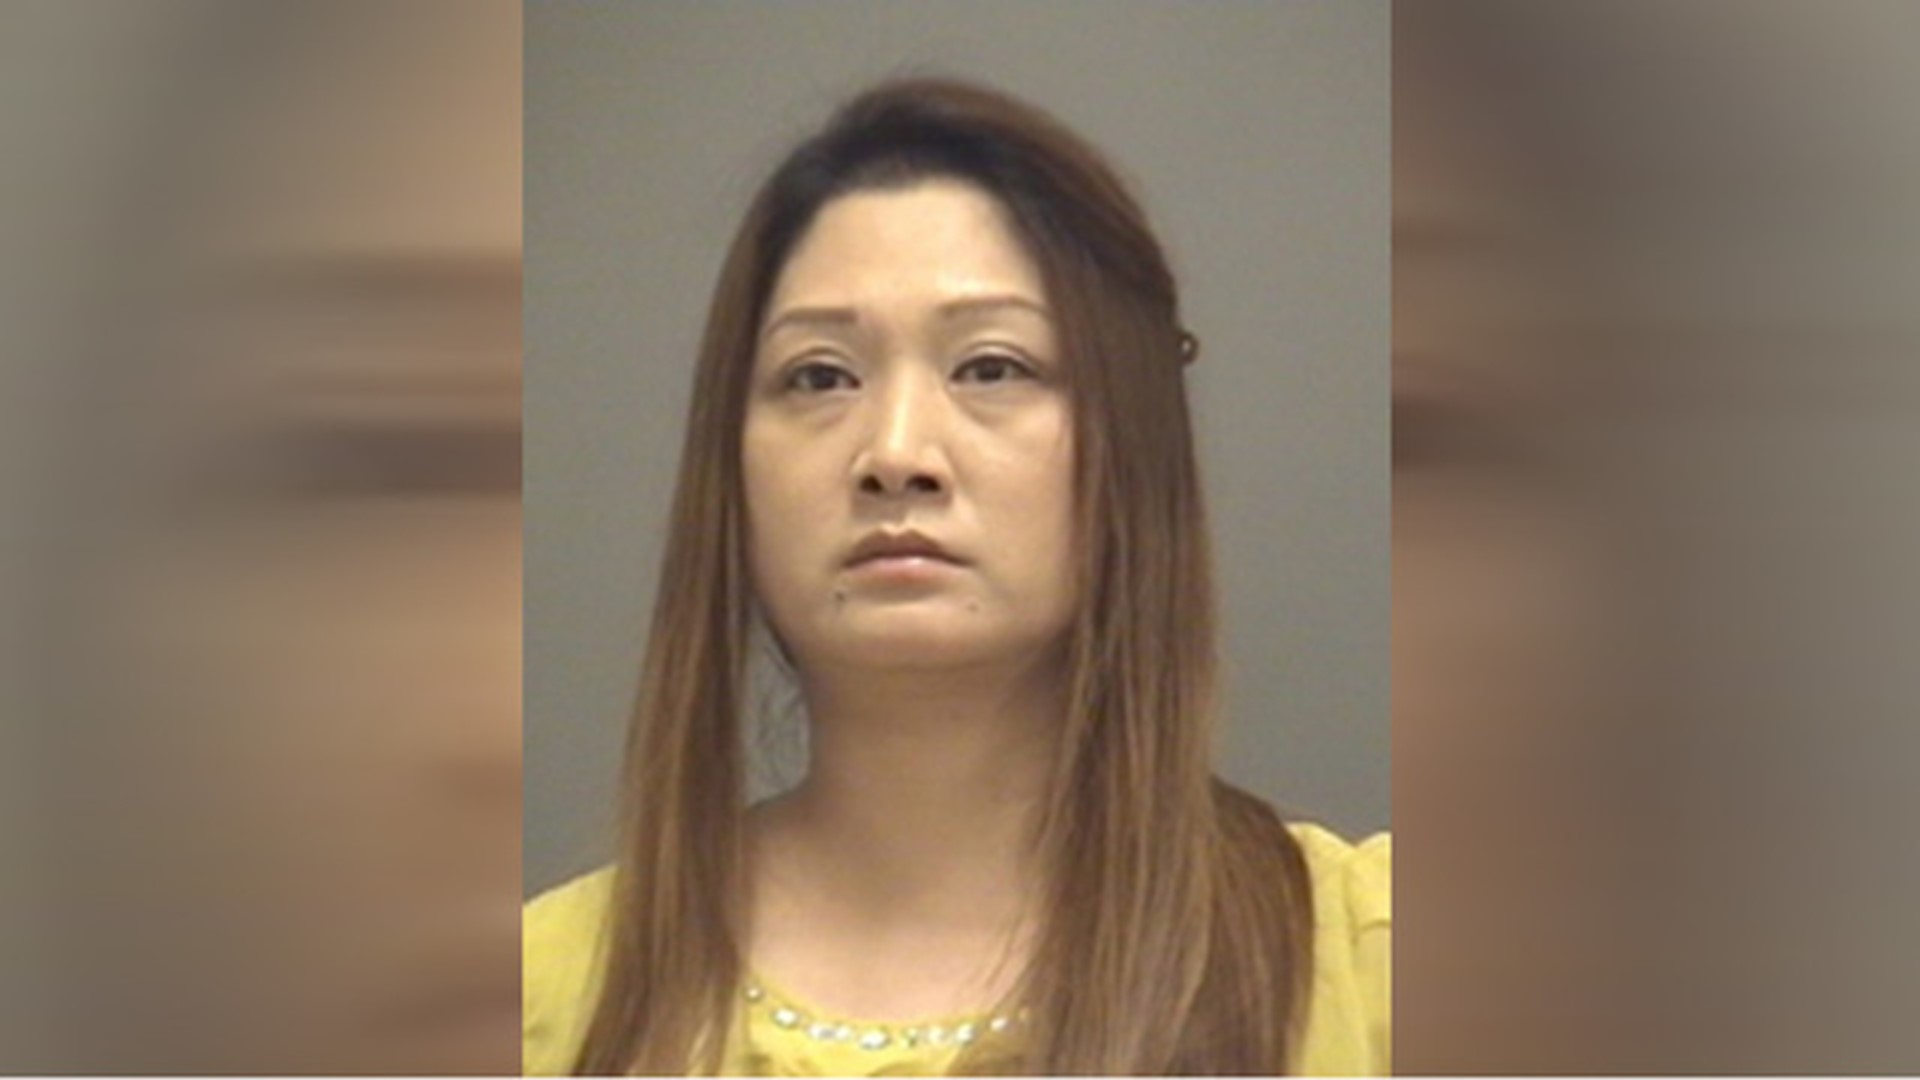 Nc Massage Parlor Owner Arrested On Prostitution Charges Free Download Nude Photo Gallery